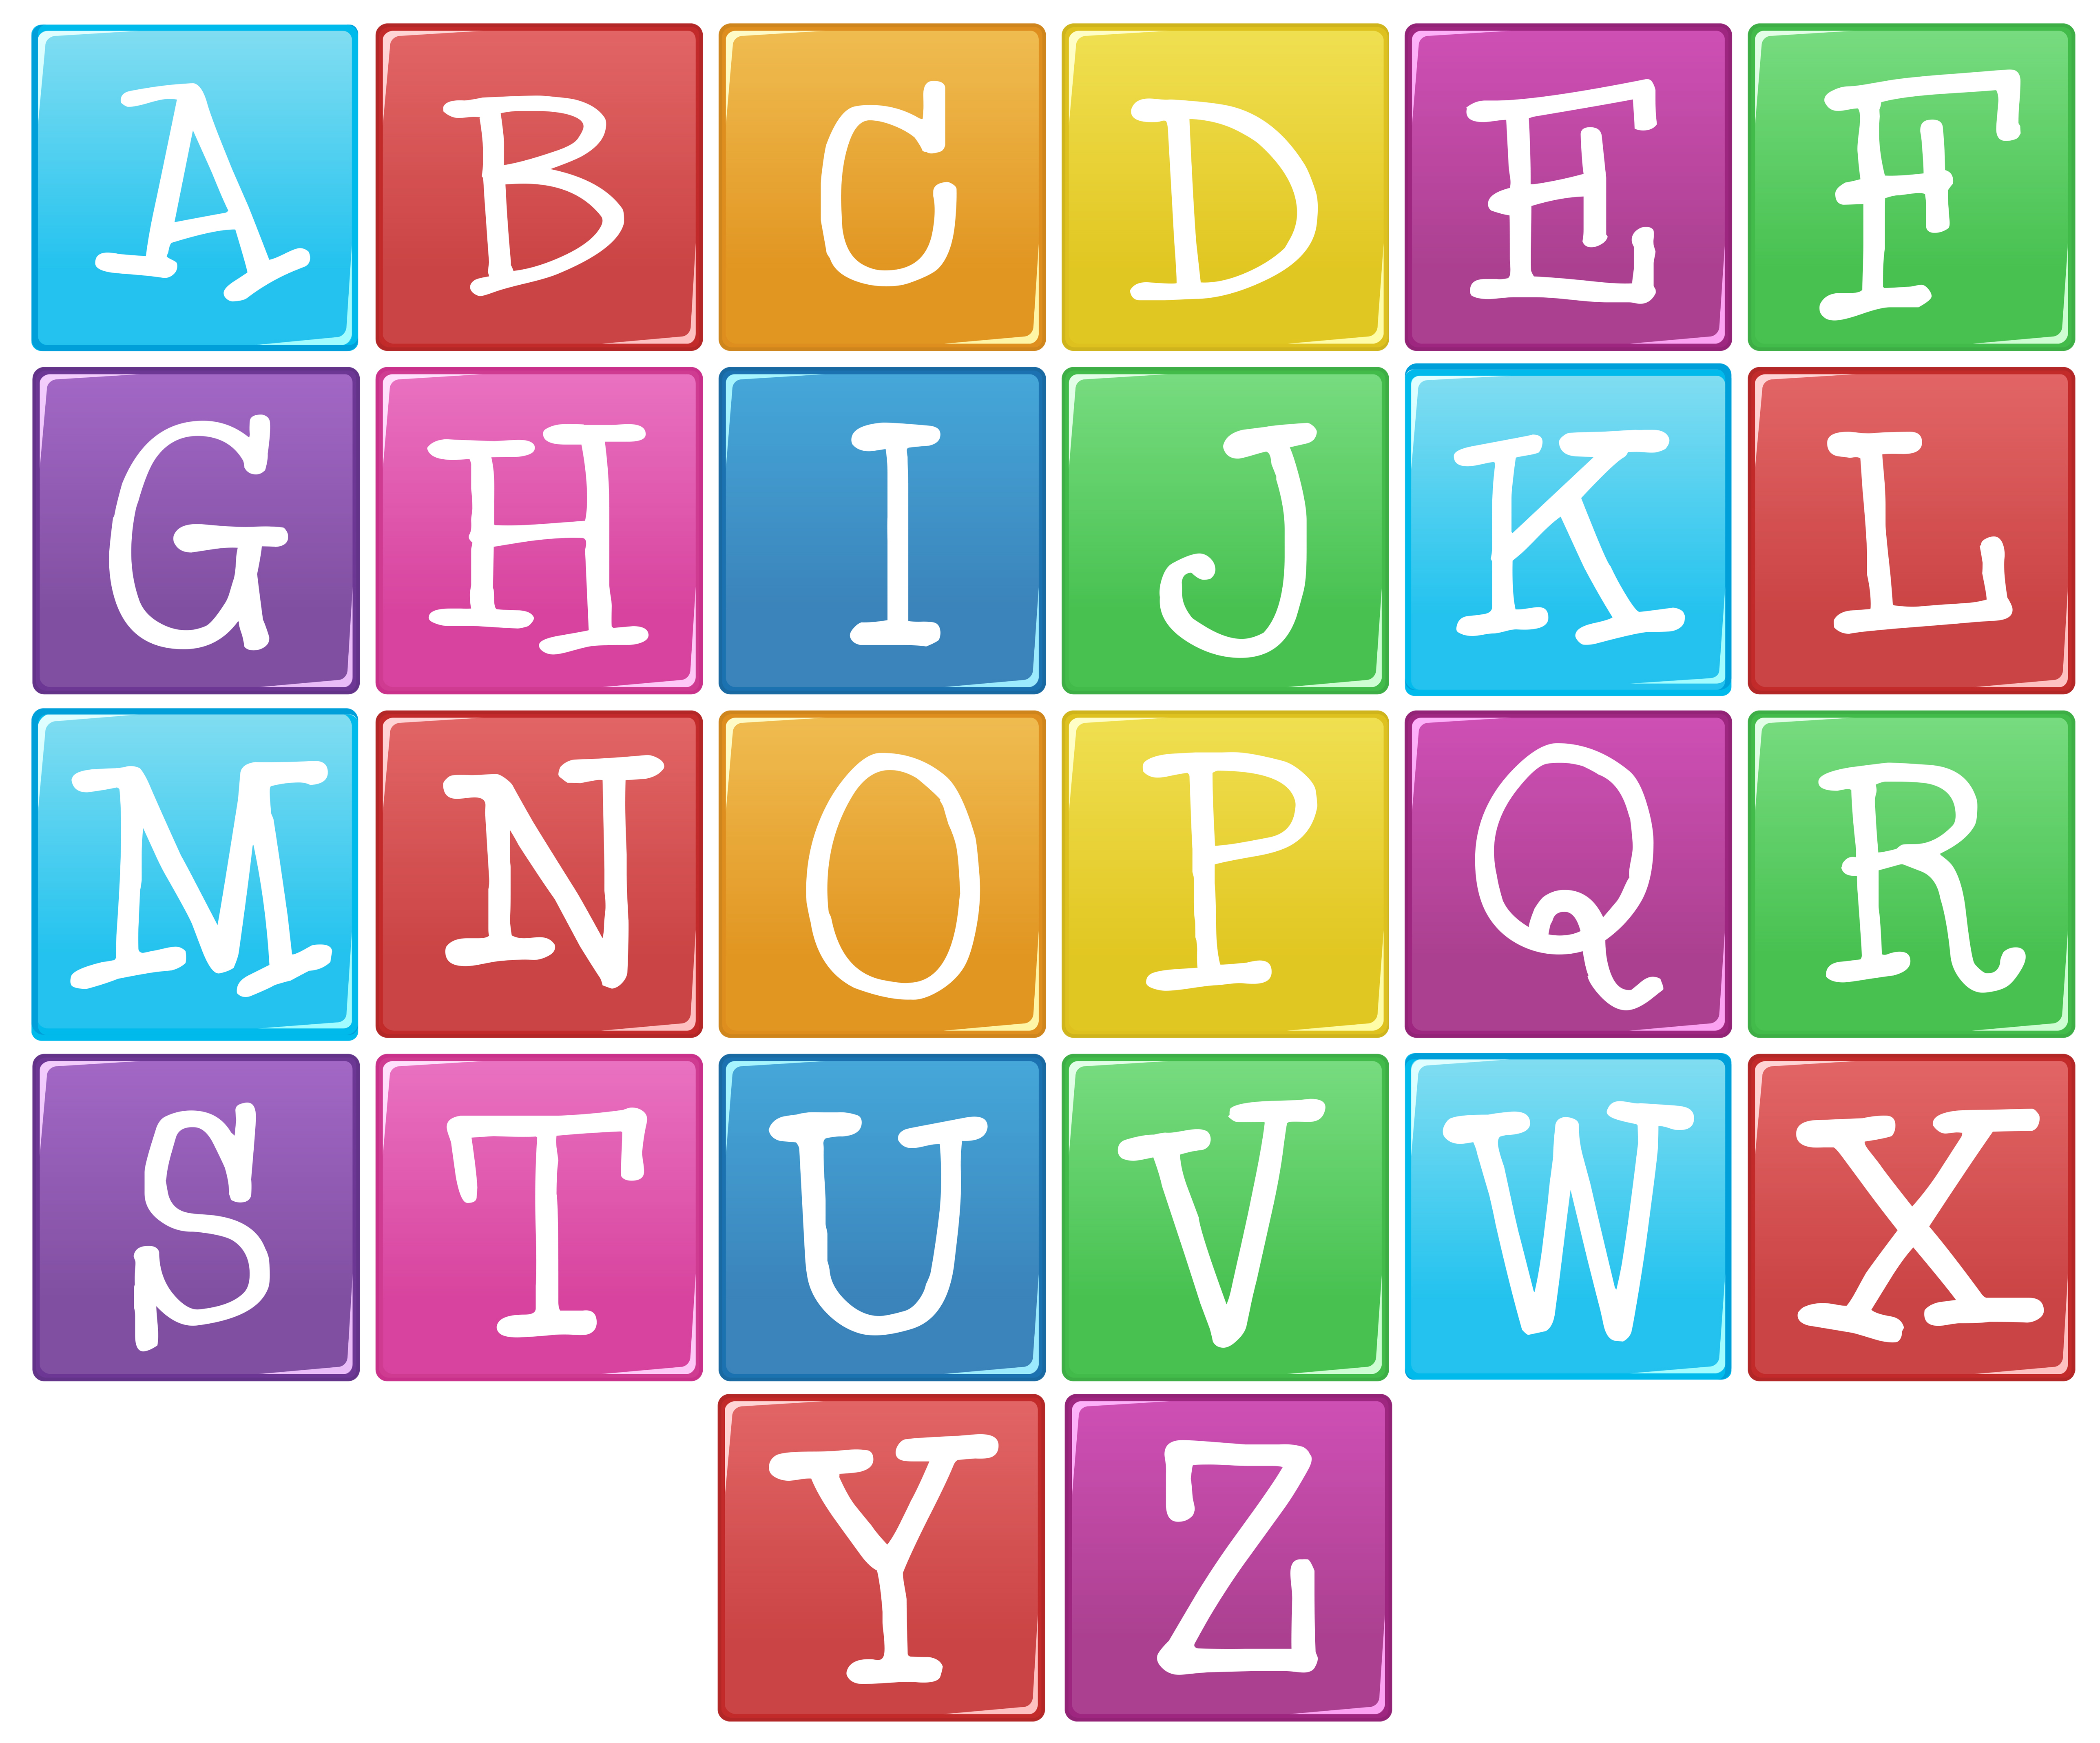 1 Alphabet In English / A to z are 26 letters of the english alphabet